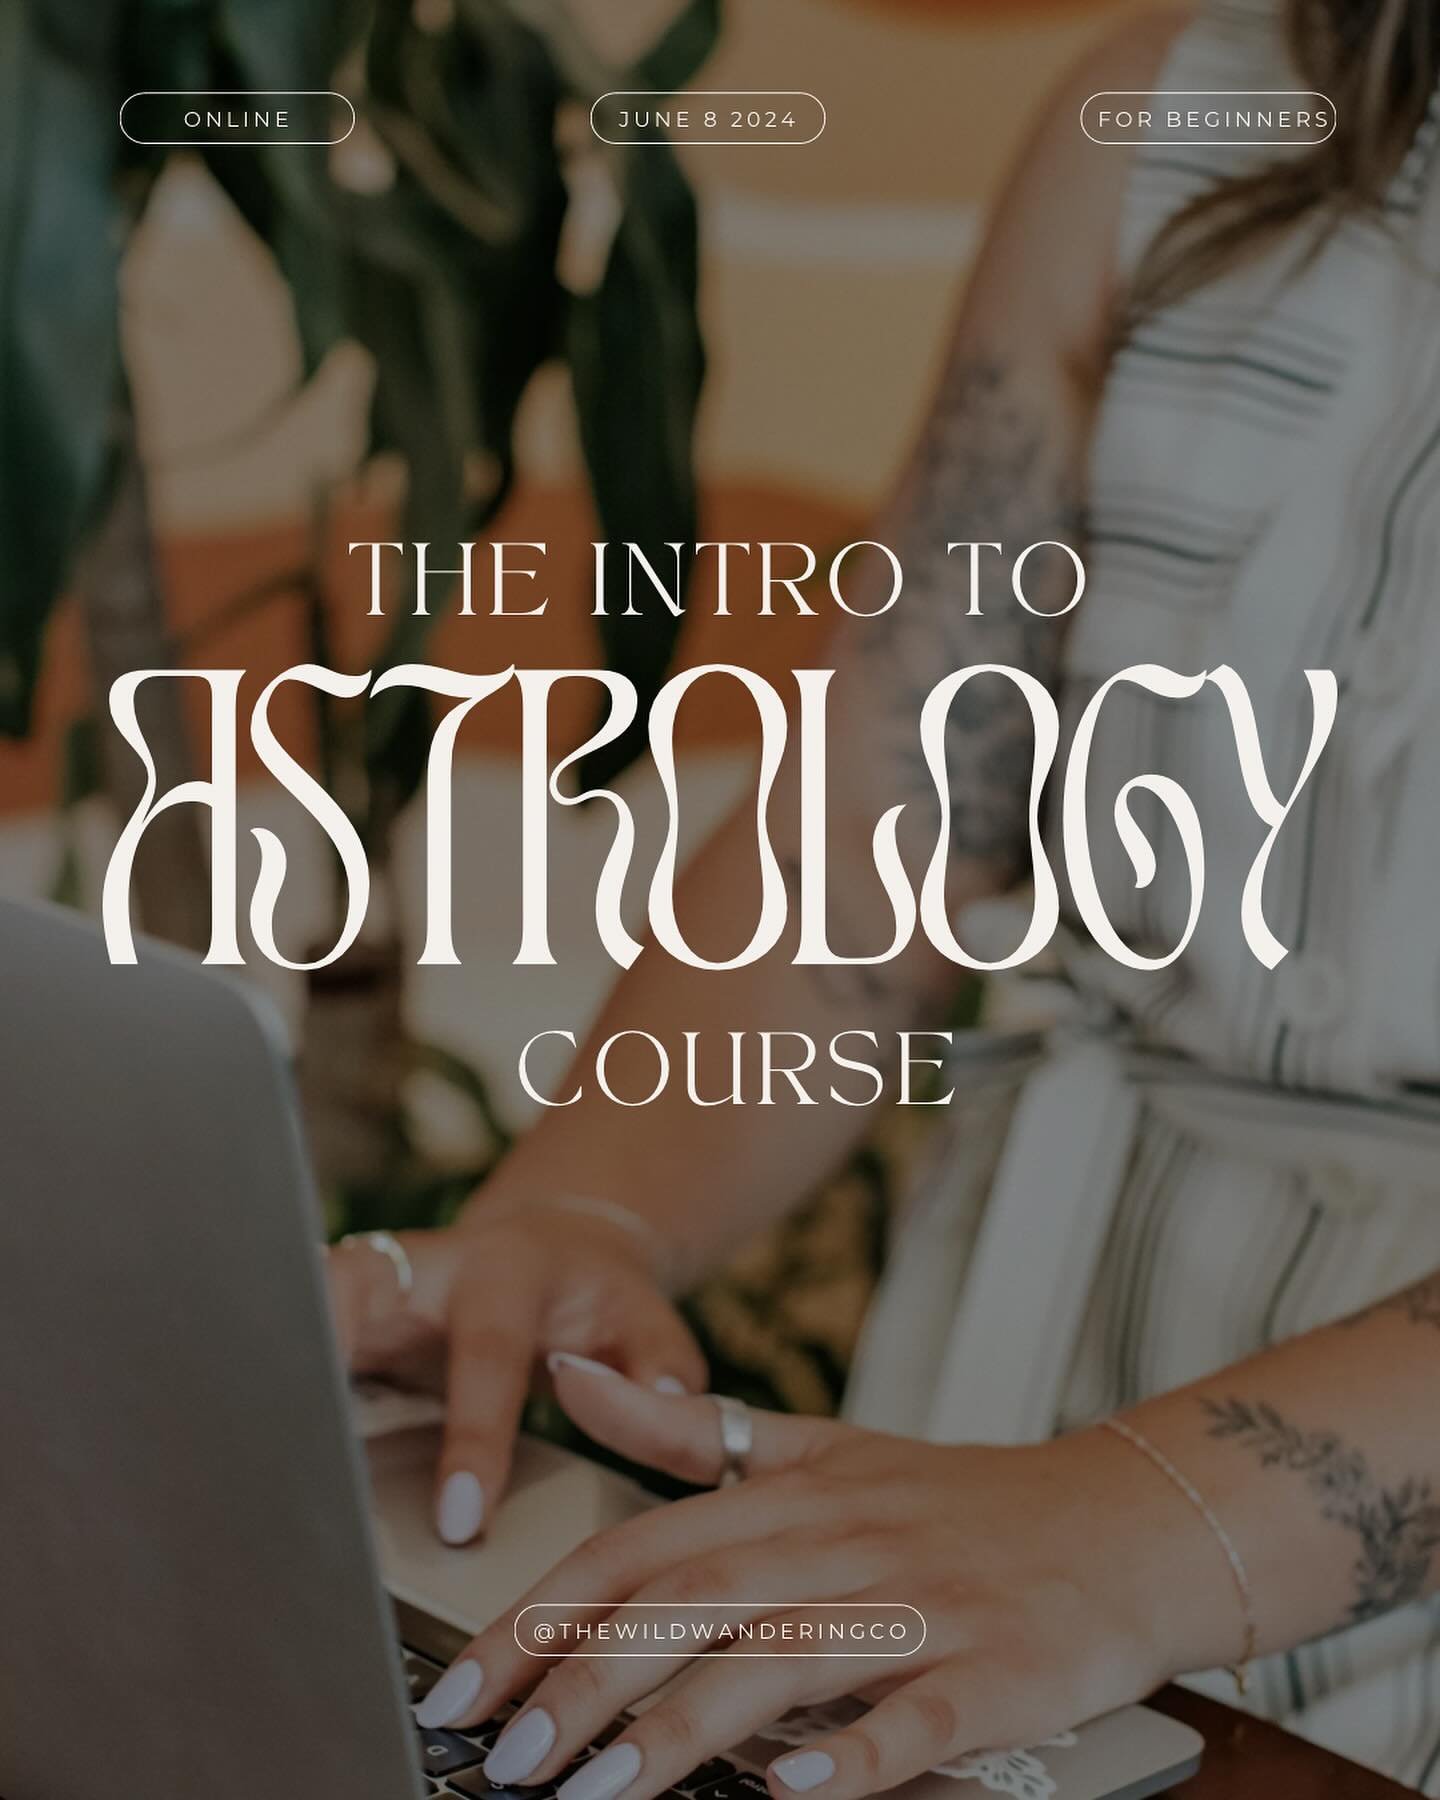 Friends, I am thrilled to announce with you the exciting news that I will be teaching an astrology course beginning in early June. 

Whether you&rsquo;ve been intrigued by astrology and want to explore your own birth chart or aspire to read charts fo